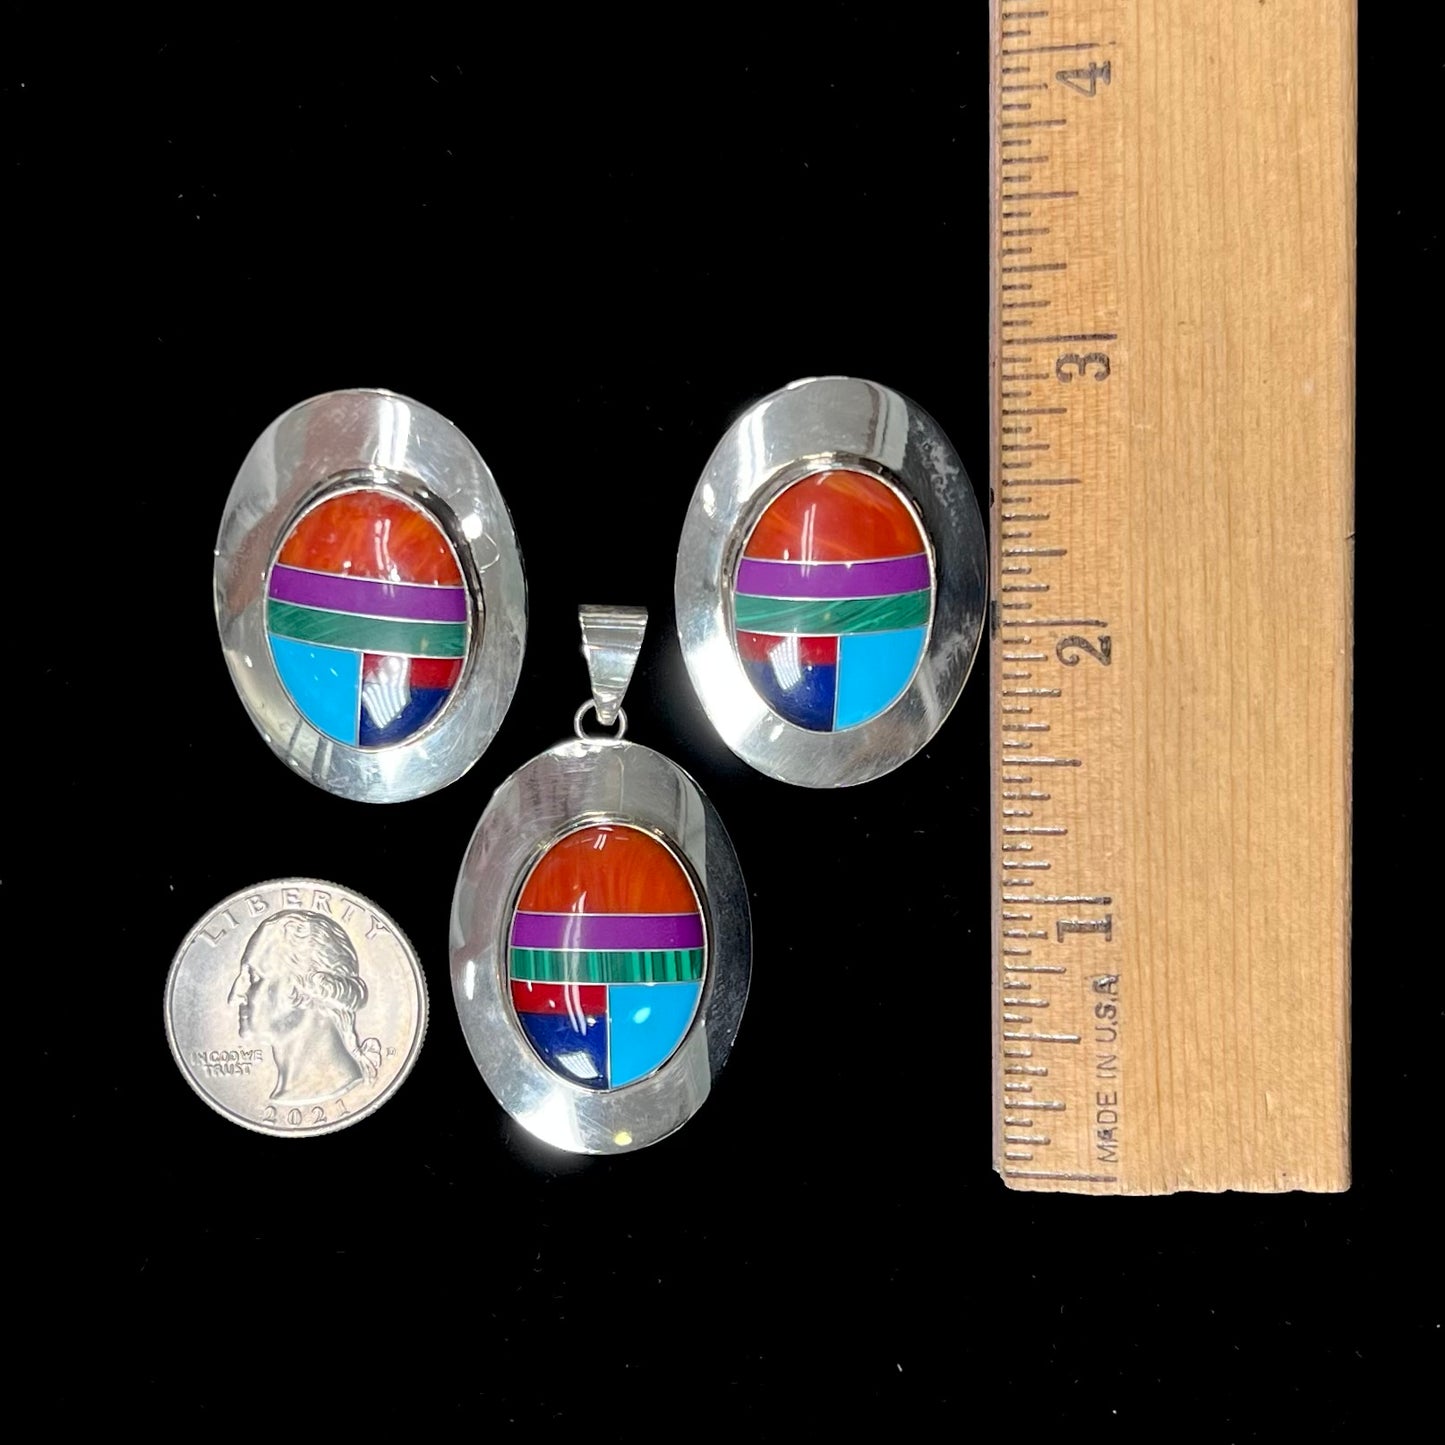 A Zuni-style pendant and earring set inlaid with spiny oyster, sugilite, malachite, turquoise, coral, and lapis lazuli stones.